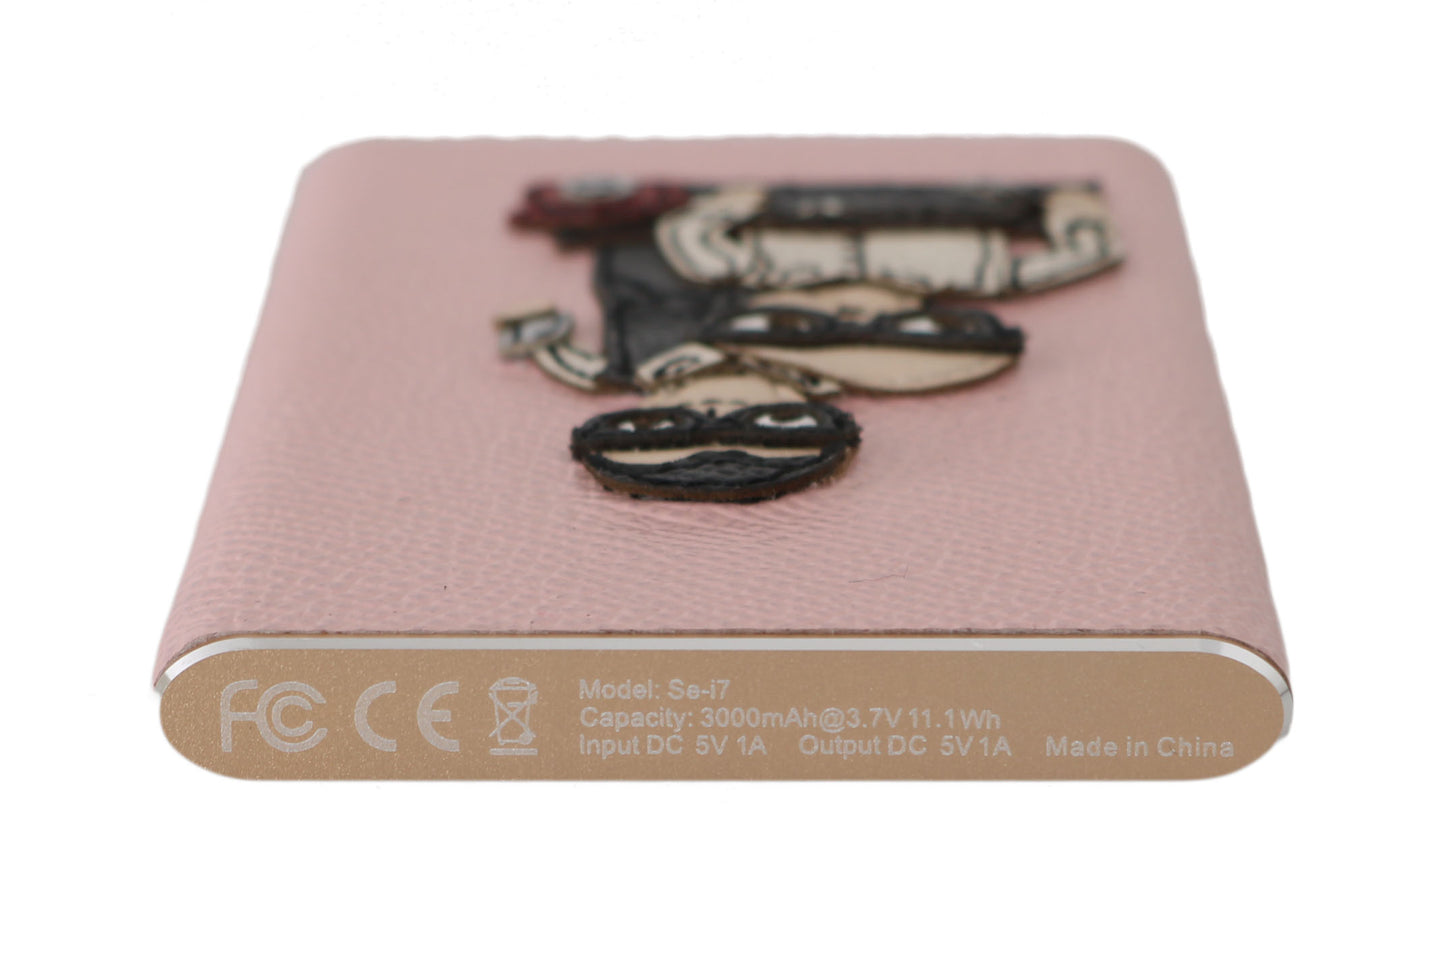 Dolce & Gabbana Charger USB Pink Leather #DGFAMILY Power Bank